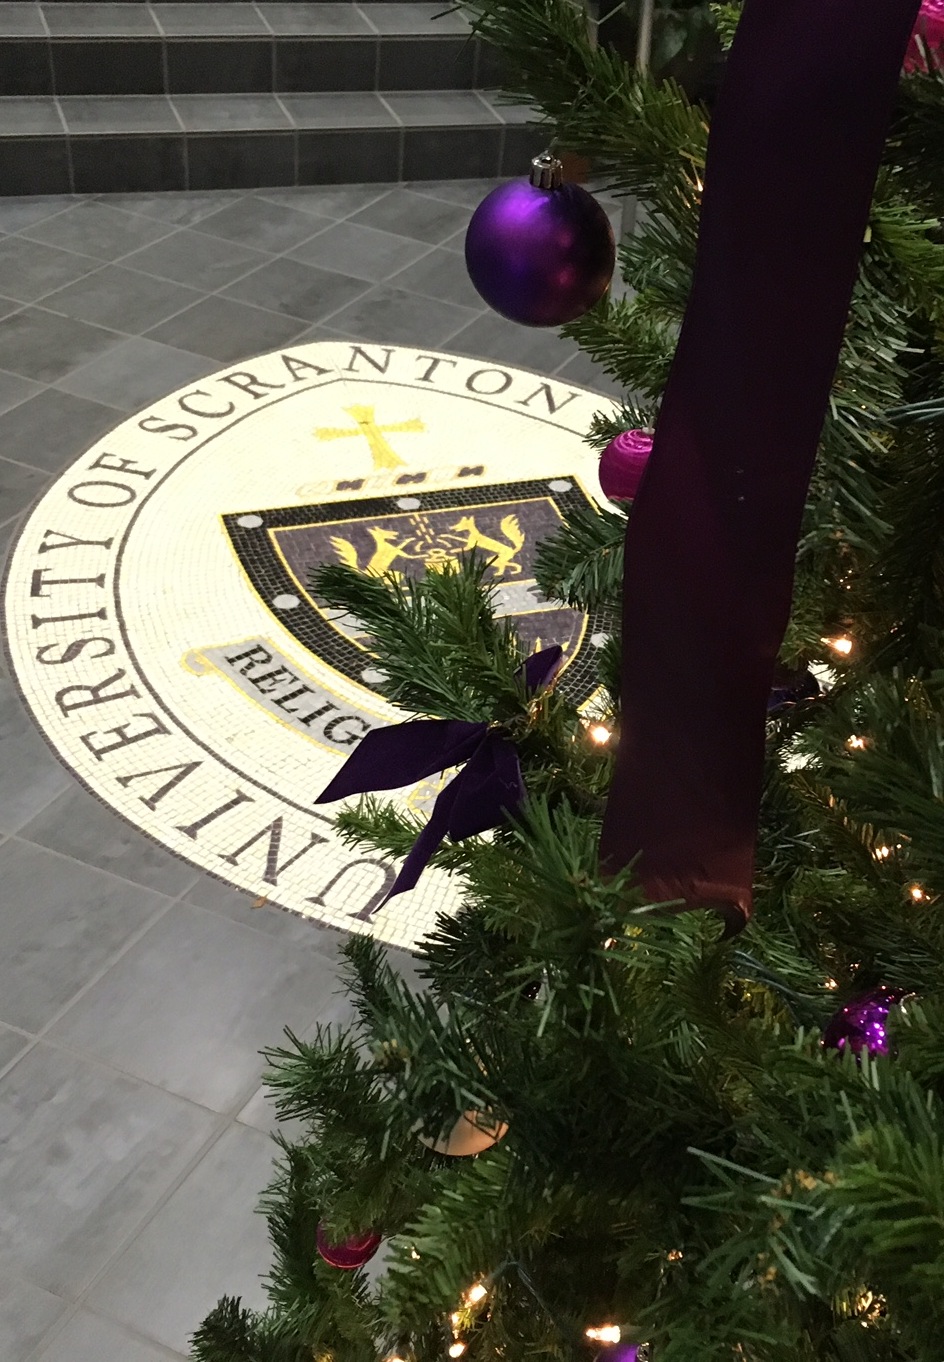 University of Scranton faculty research offers tips for well-being this holiday season.